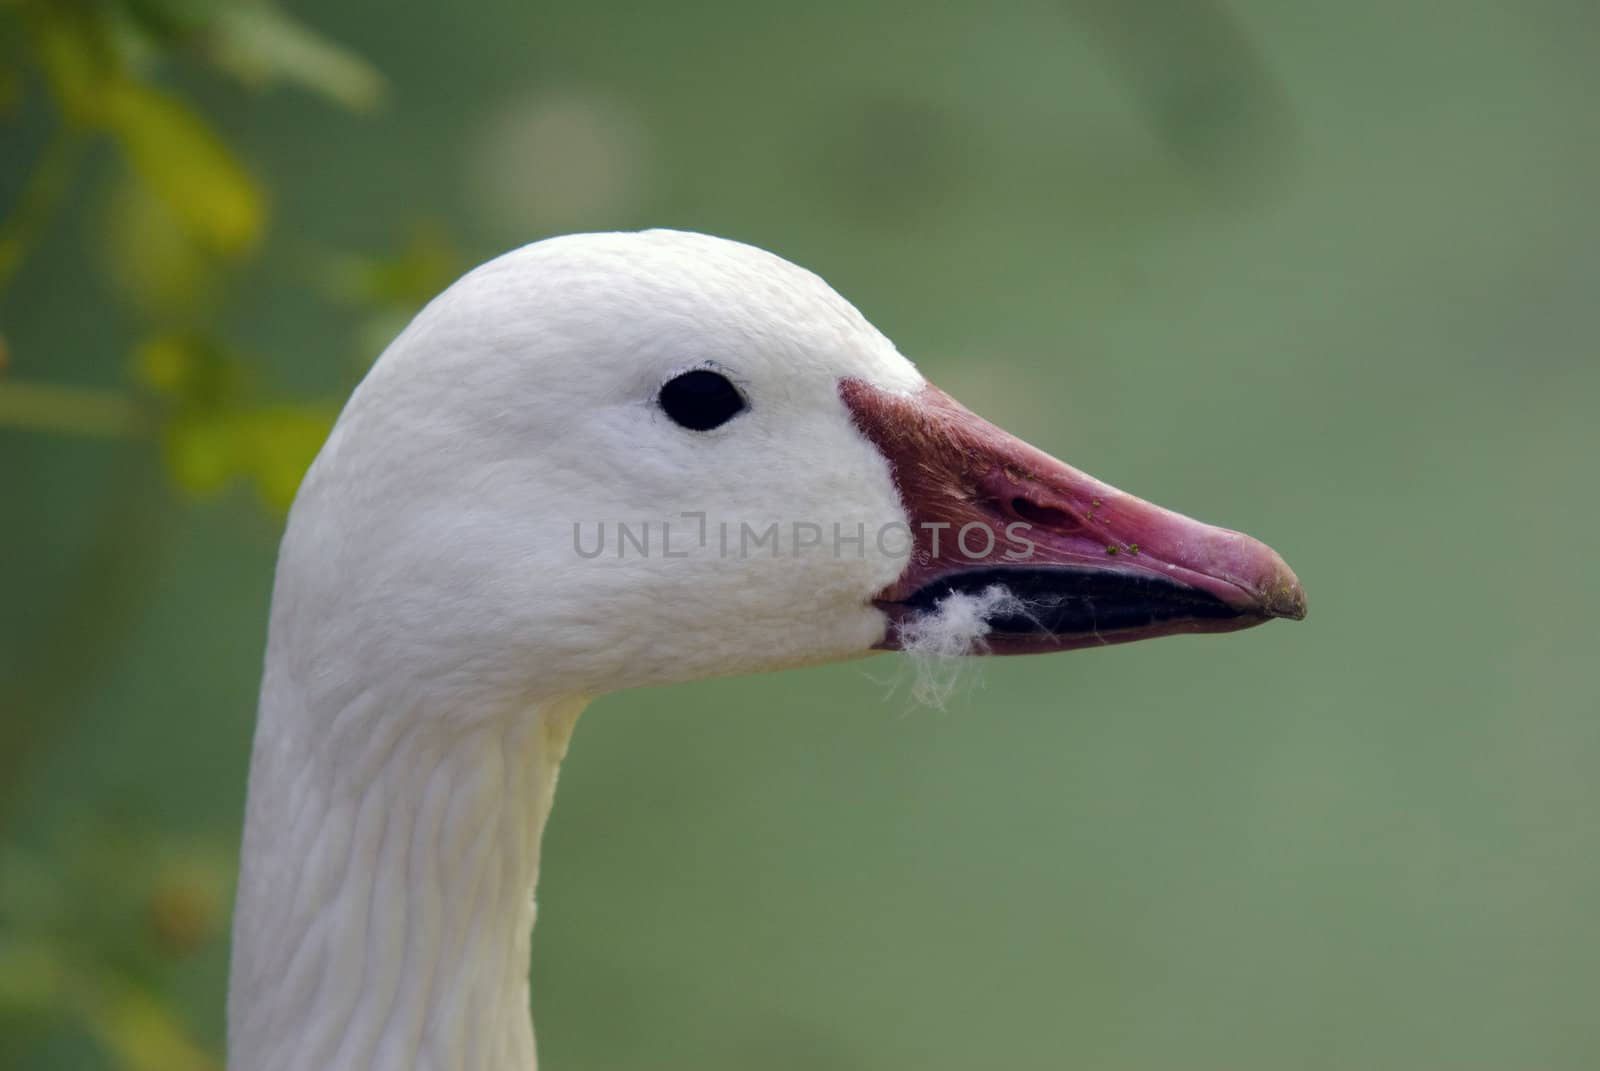 Close up portrait of a goose with a green background